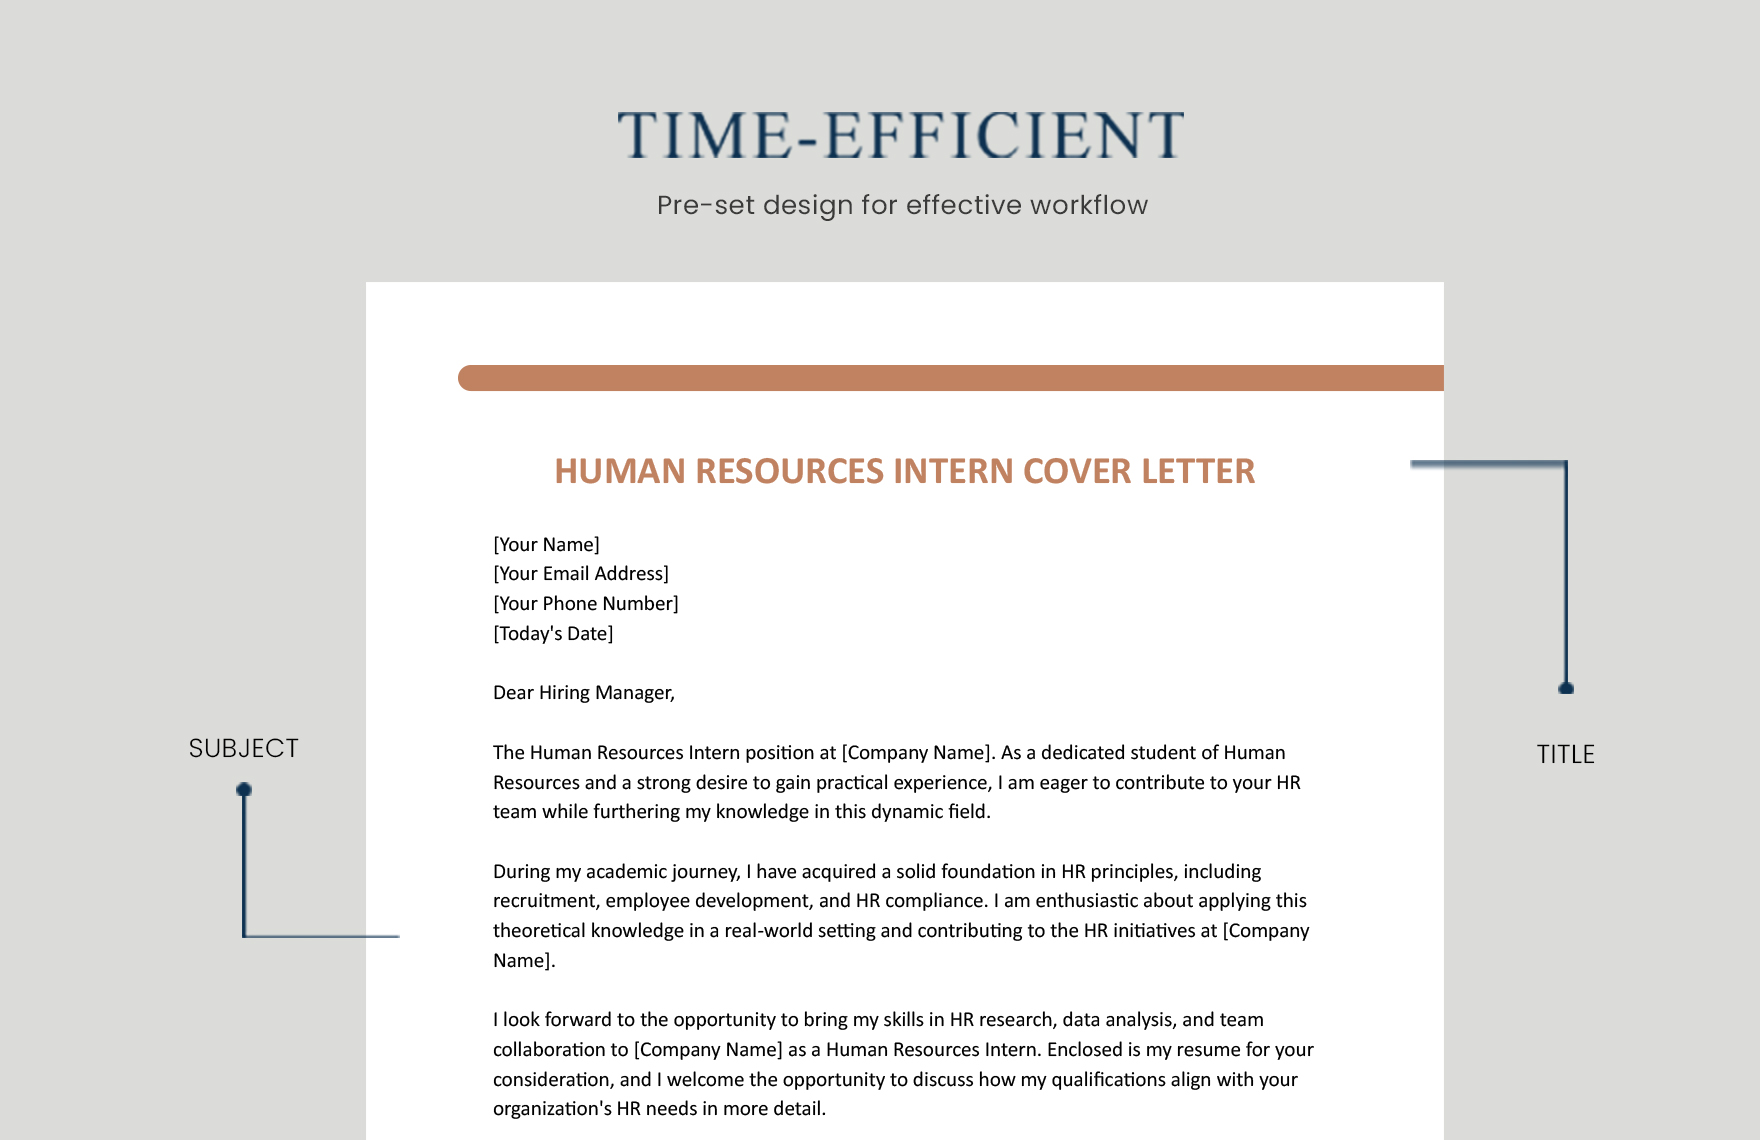 Human Resources Intern Cover Letter